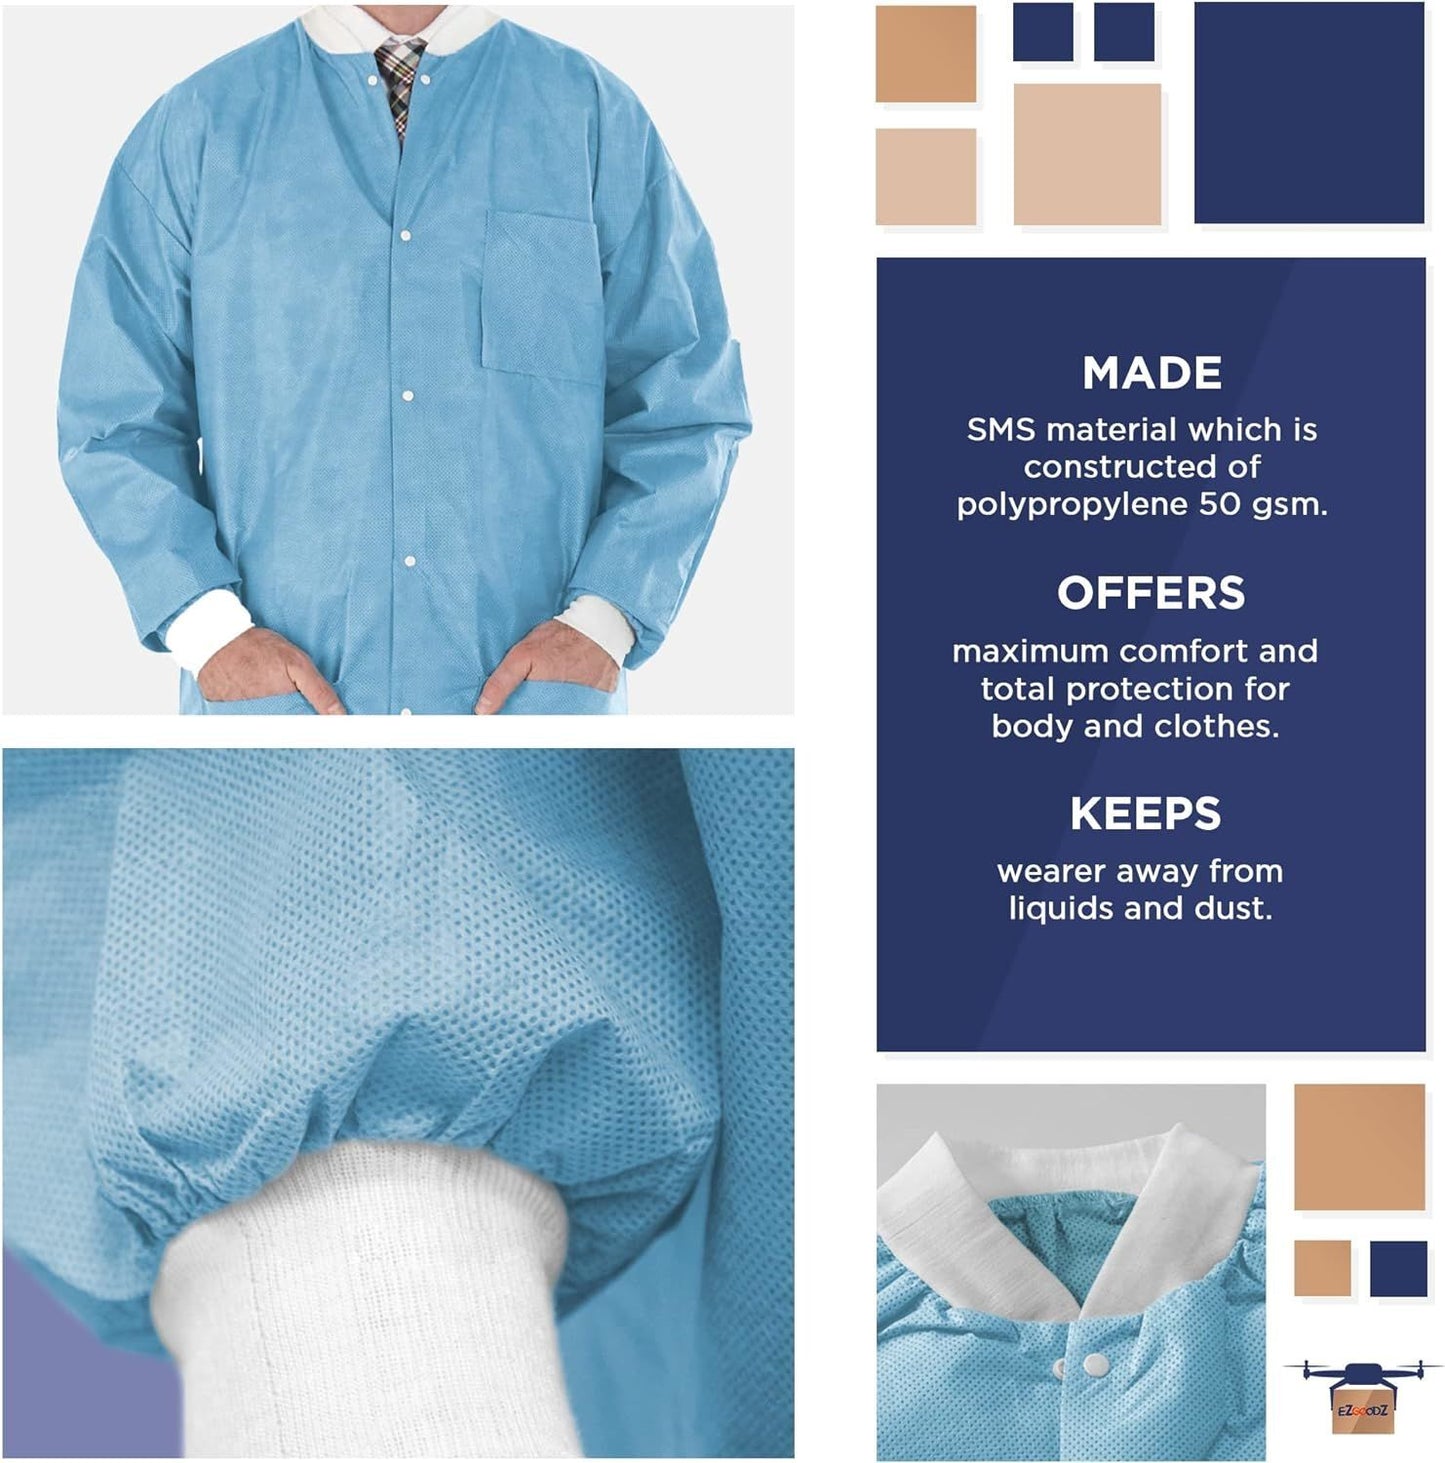 Disposable Lab Jackets; 33" Long. Pack of 100 Blue Hip-Length Work Gowns XX-Large. SMS 50 gsm Shirts with Snaps Front; Knit Cuffs & Collar; 3 Pockets. PPE Body Protective Short Coats in Bulk.